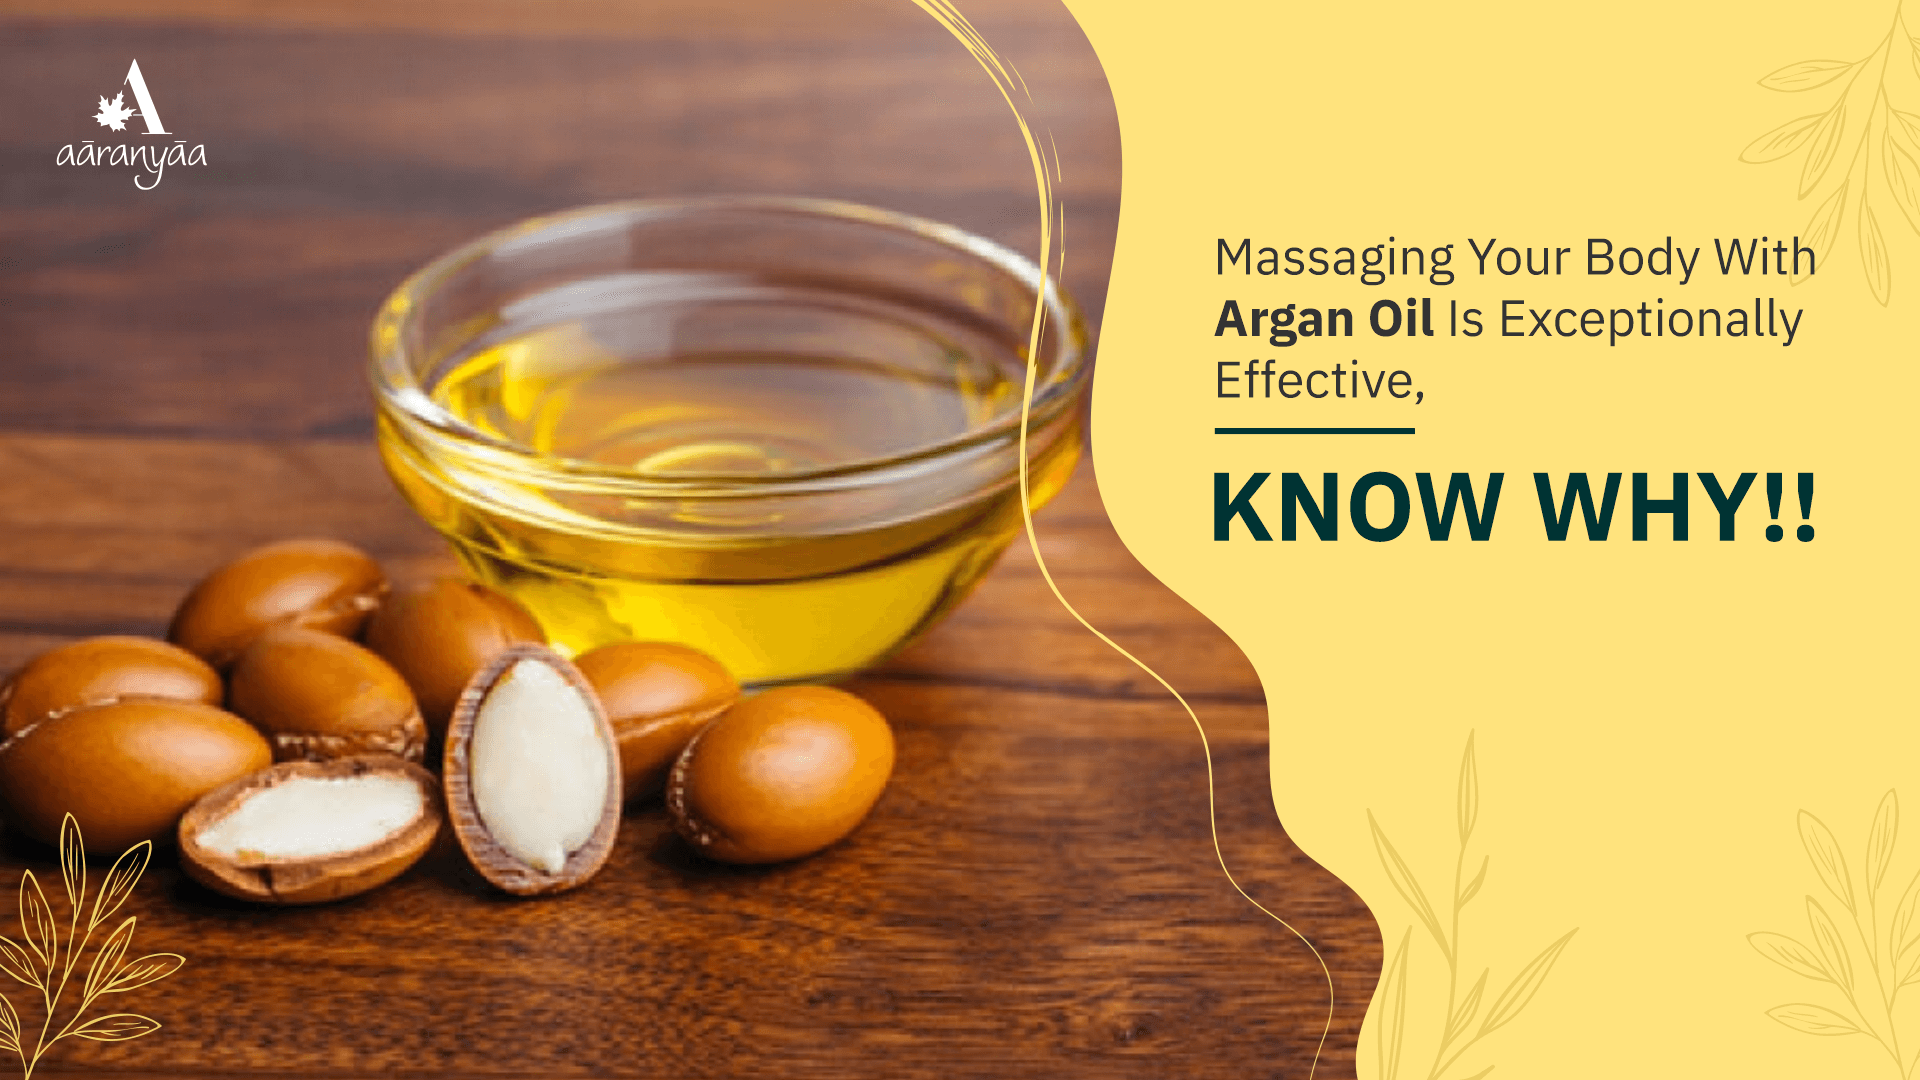 Massaging Your Body With Argan Oil Is Exceptionally Effective, Know Why!! - aaranyaa skincare